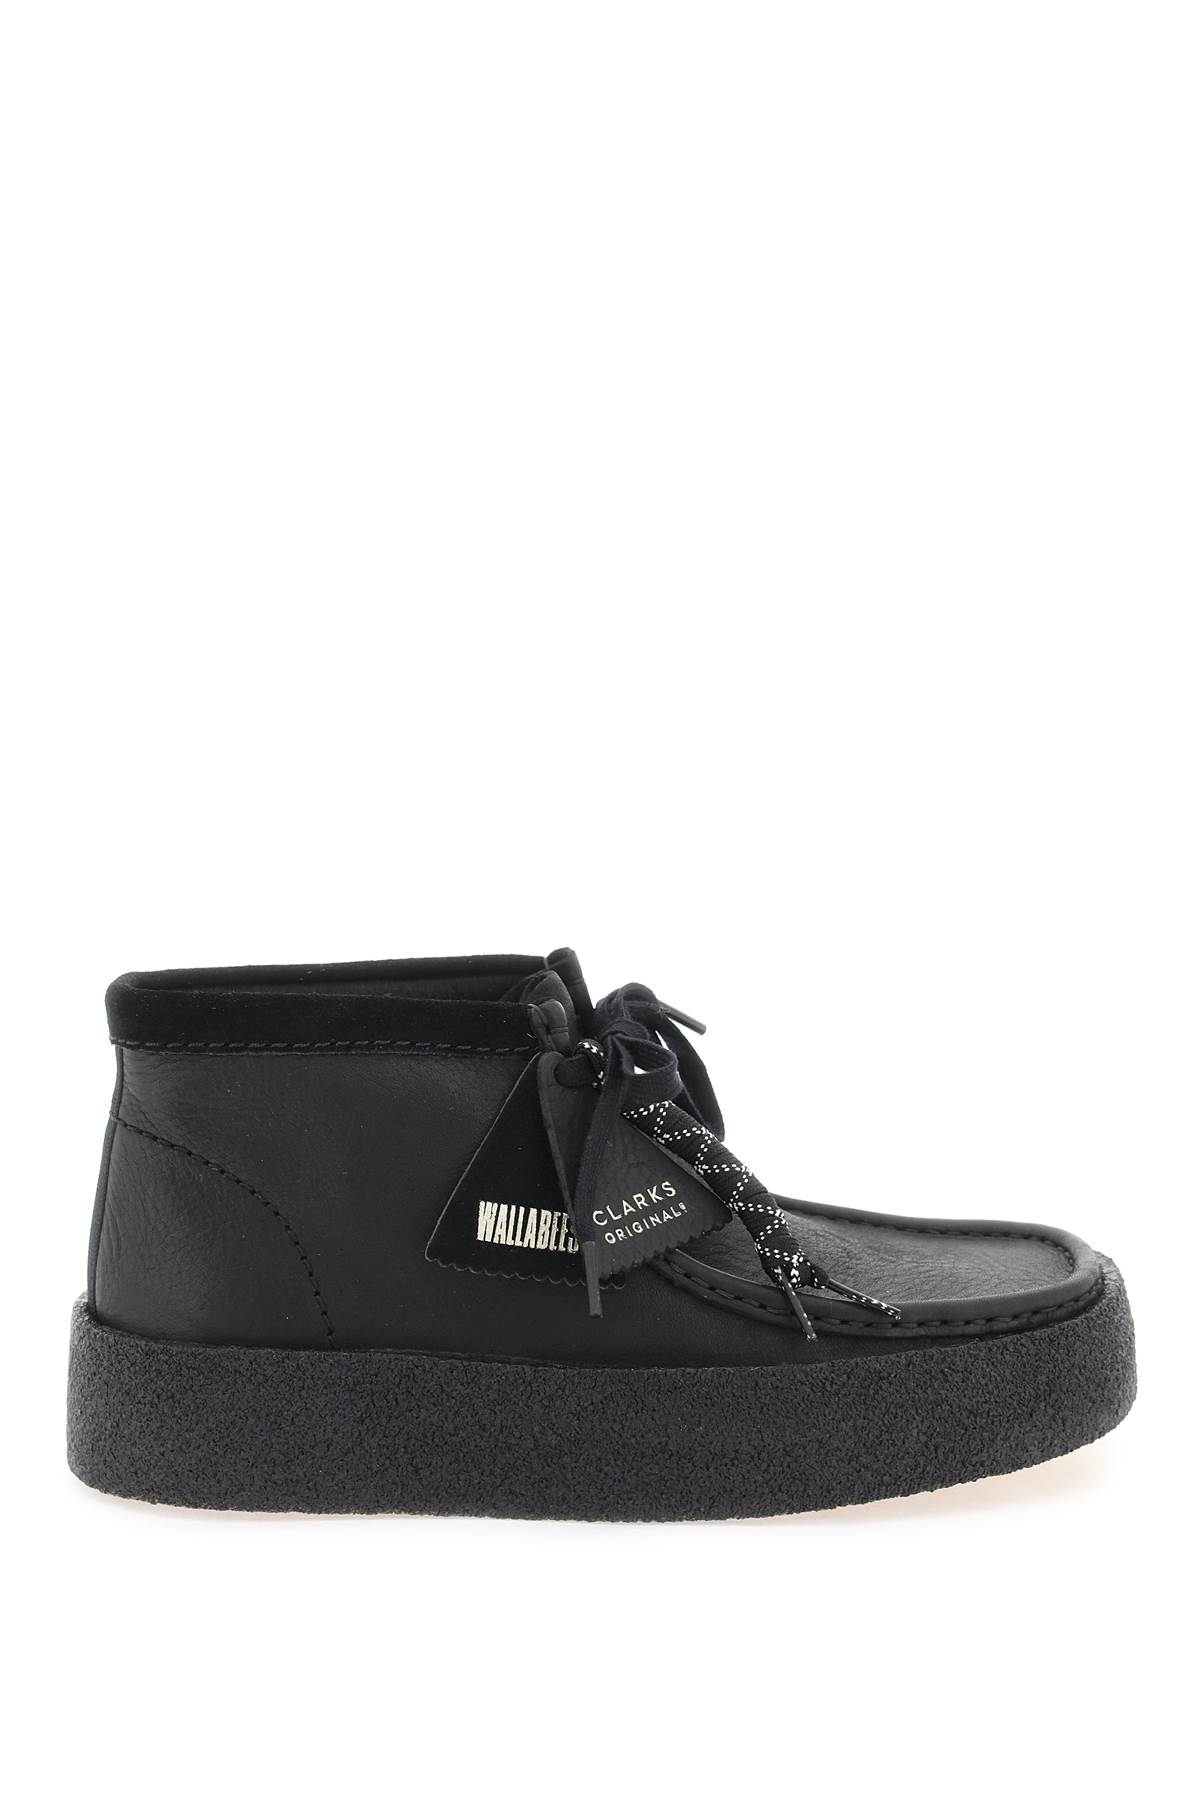 Shop Clarks Wallabee Cup Bt Lace-up Shoes In Black (black)